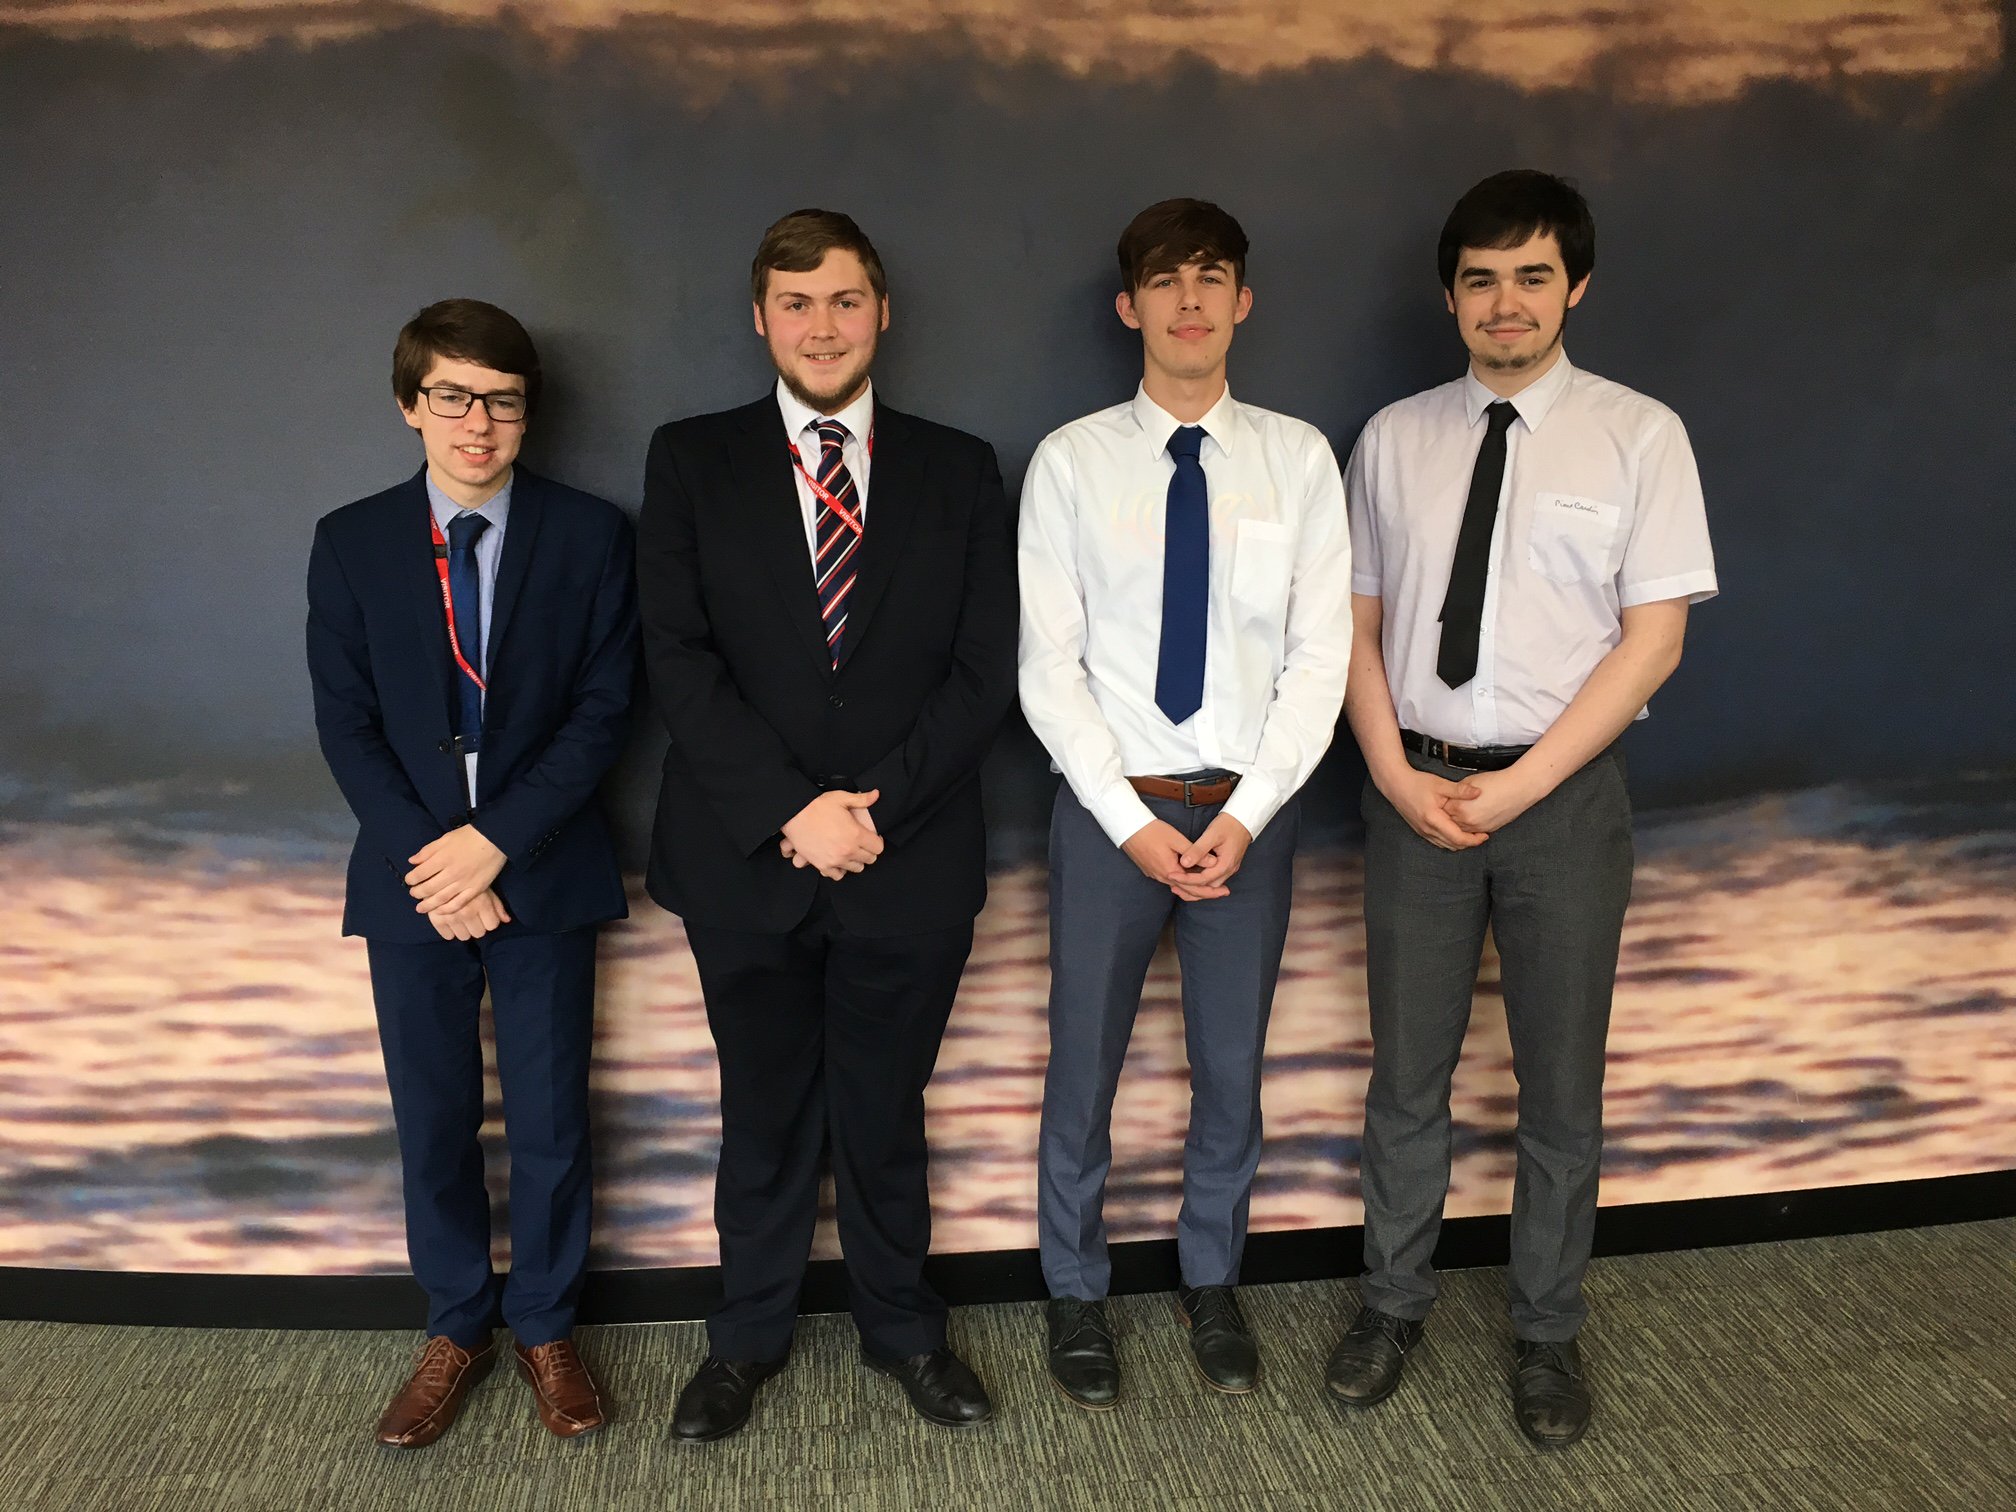 South Devon UTC students turn into engineers for the week